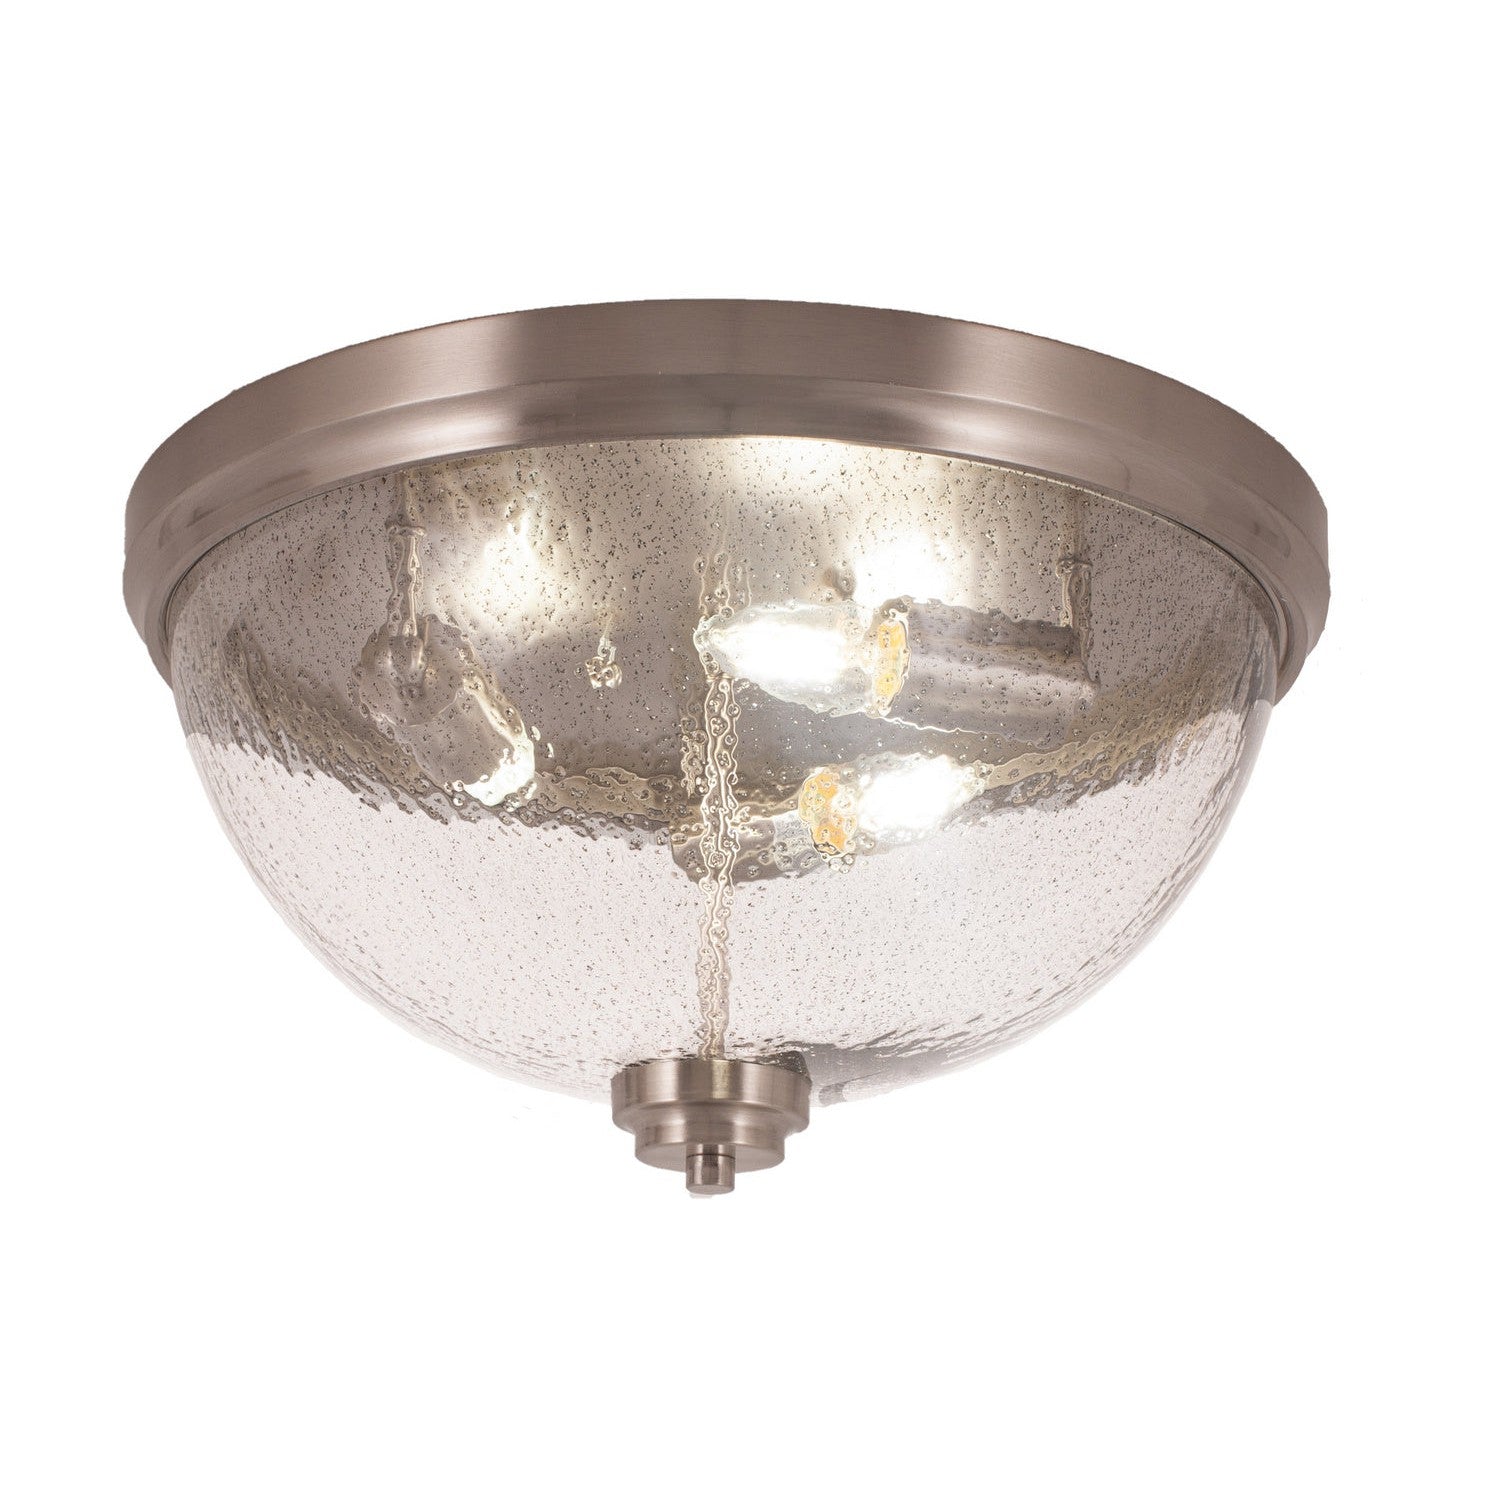 Toltec Any 826-bn-2 Ceiling Light - Brushed Nickel